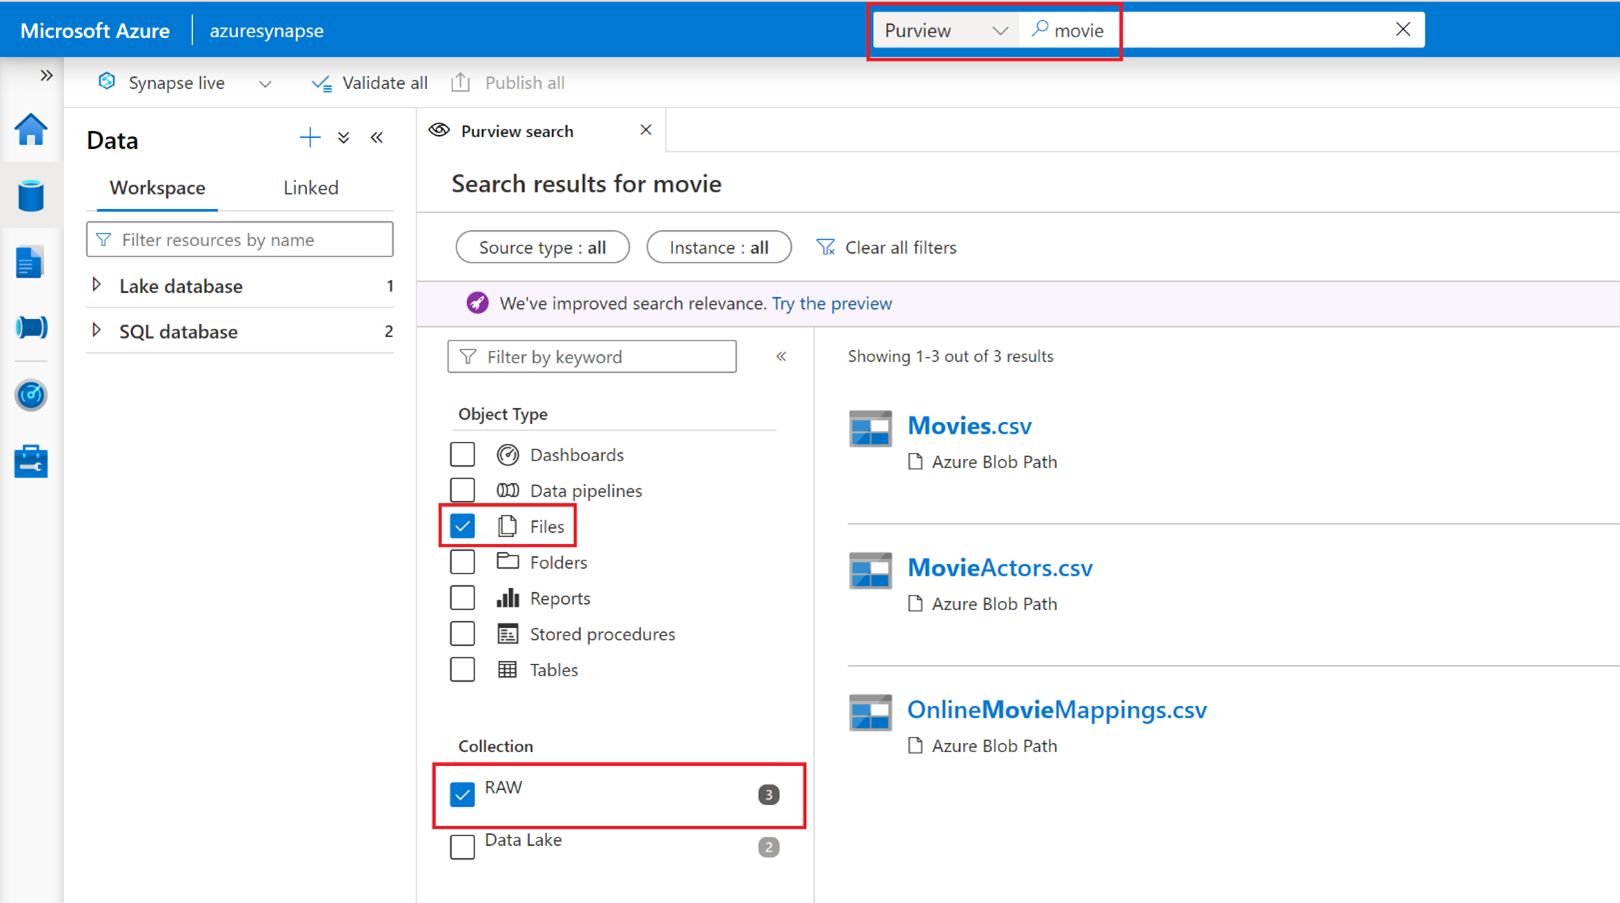 The term movie is in the search bar. The search can be refined by specifying an object typye and collection in the filter pane on the left side of the search results.